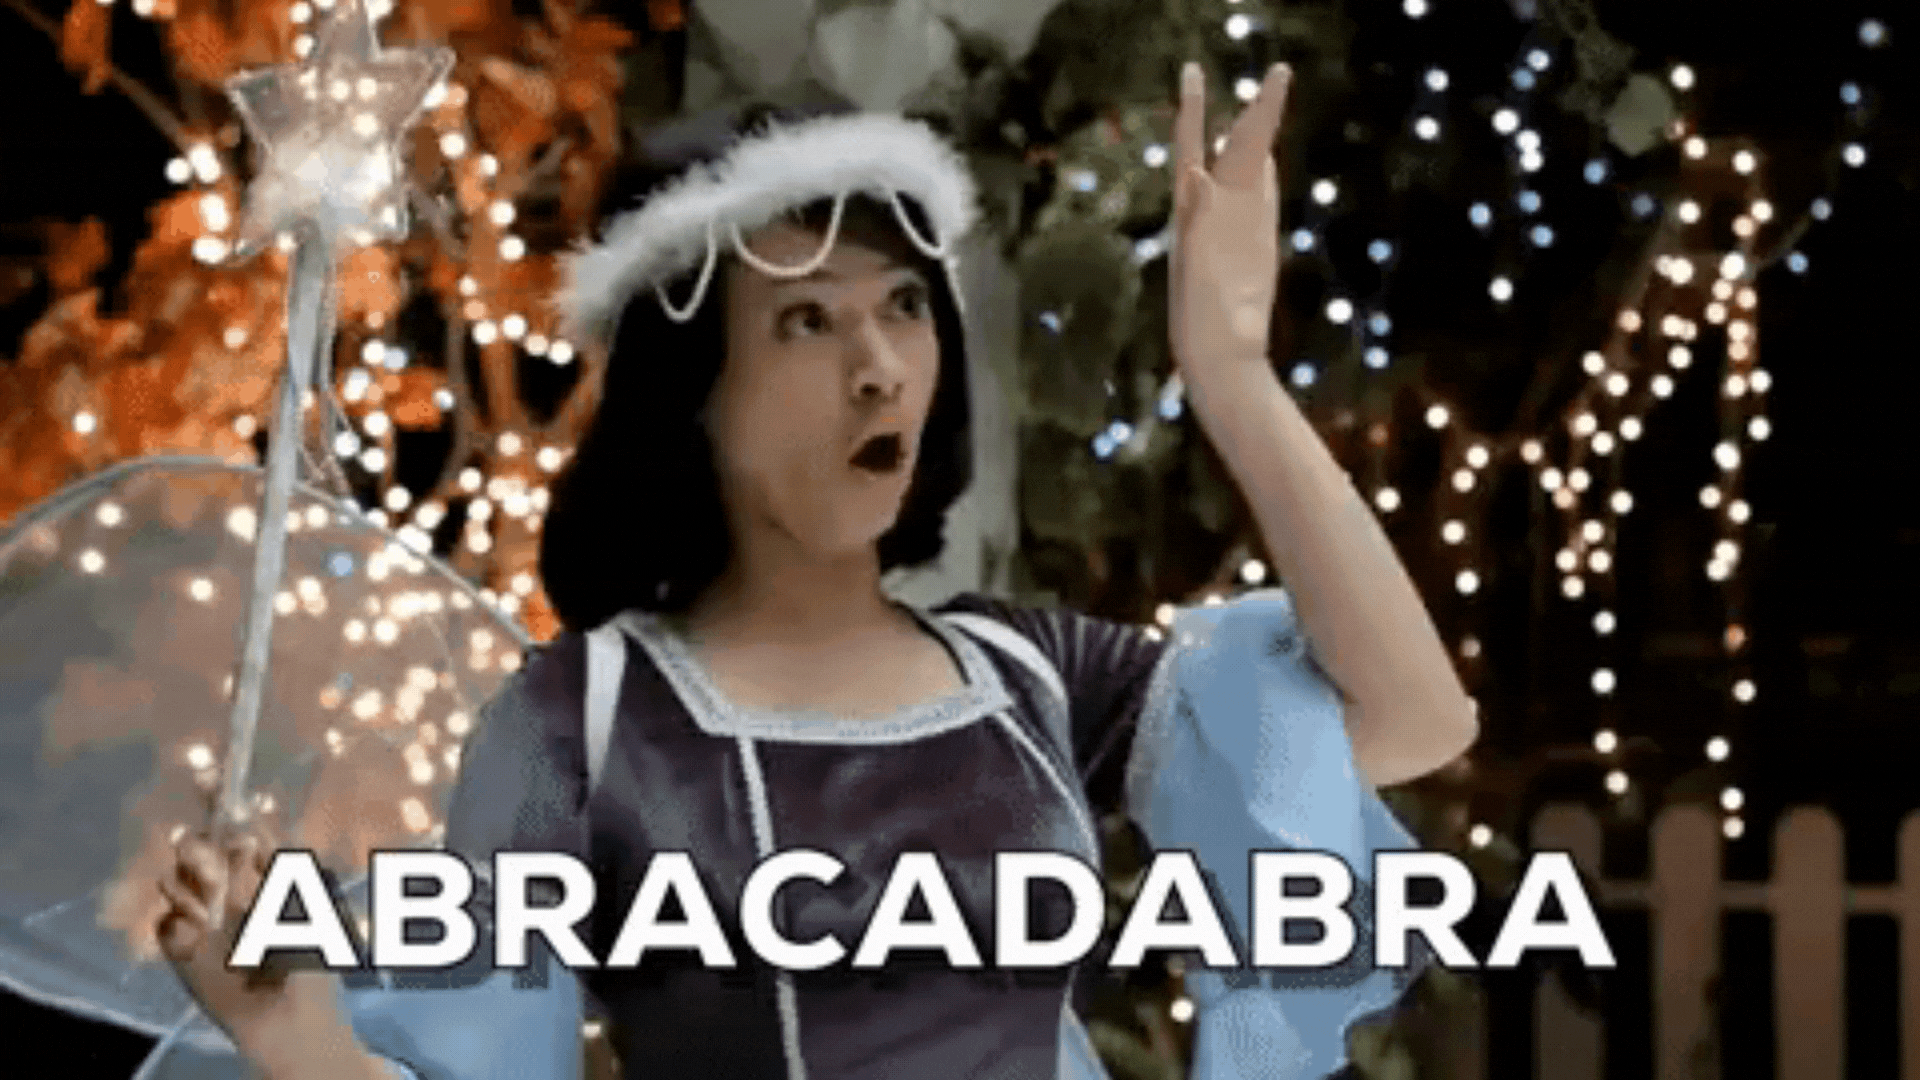 Animated GIF of a woman with brown hair wearing a fairy costume waiving a magic wand as the text 'Abracadabra' appears